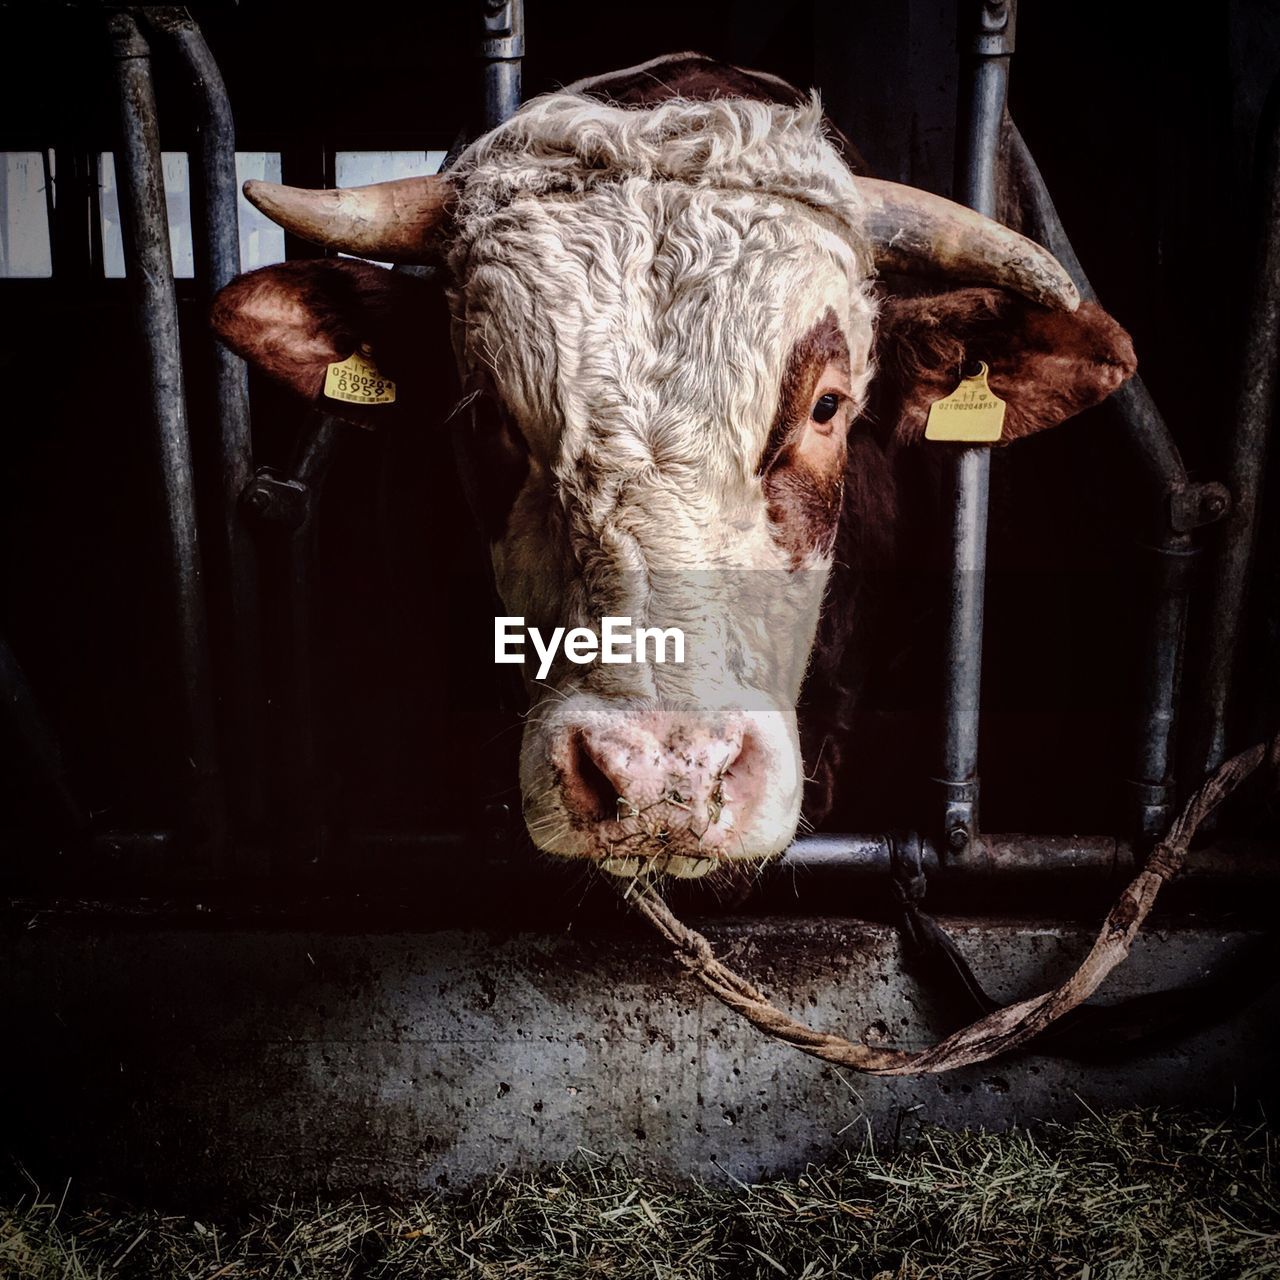 Portrait of a cow in confinement